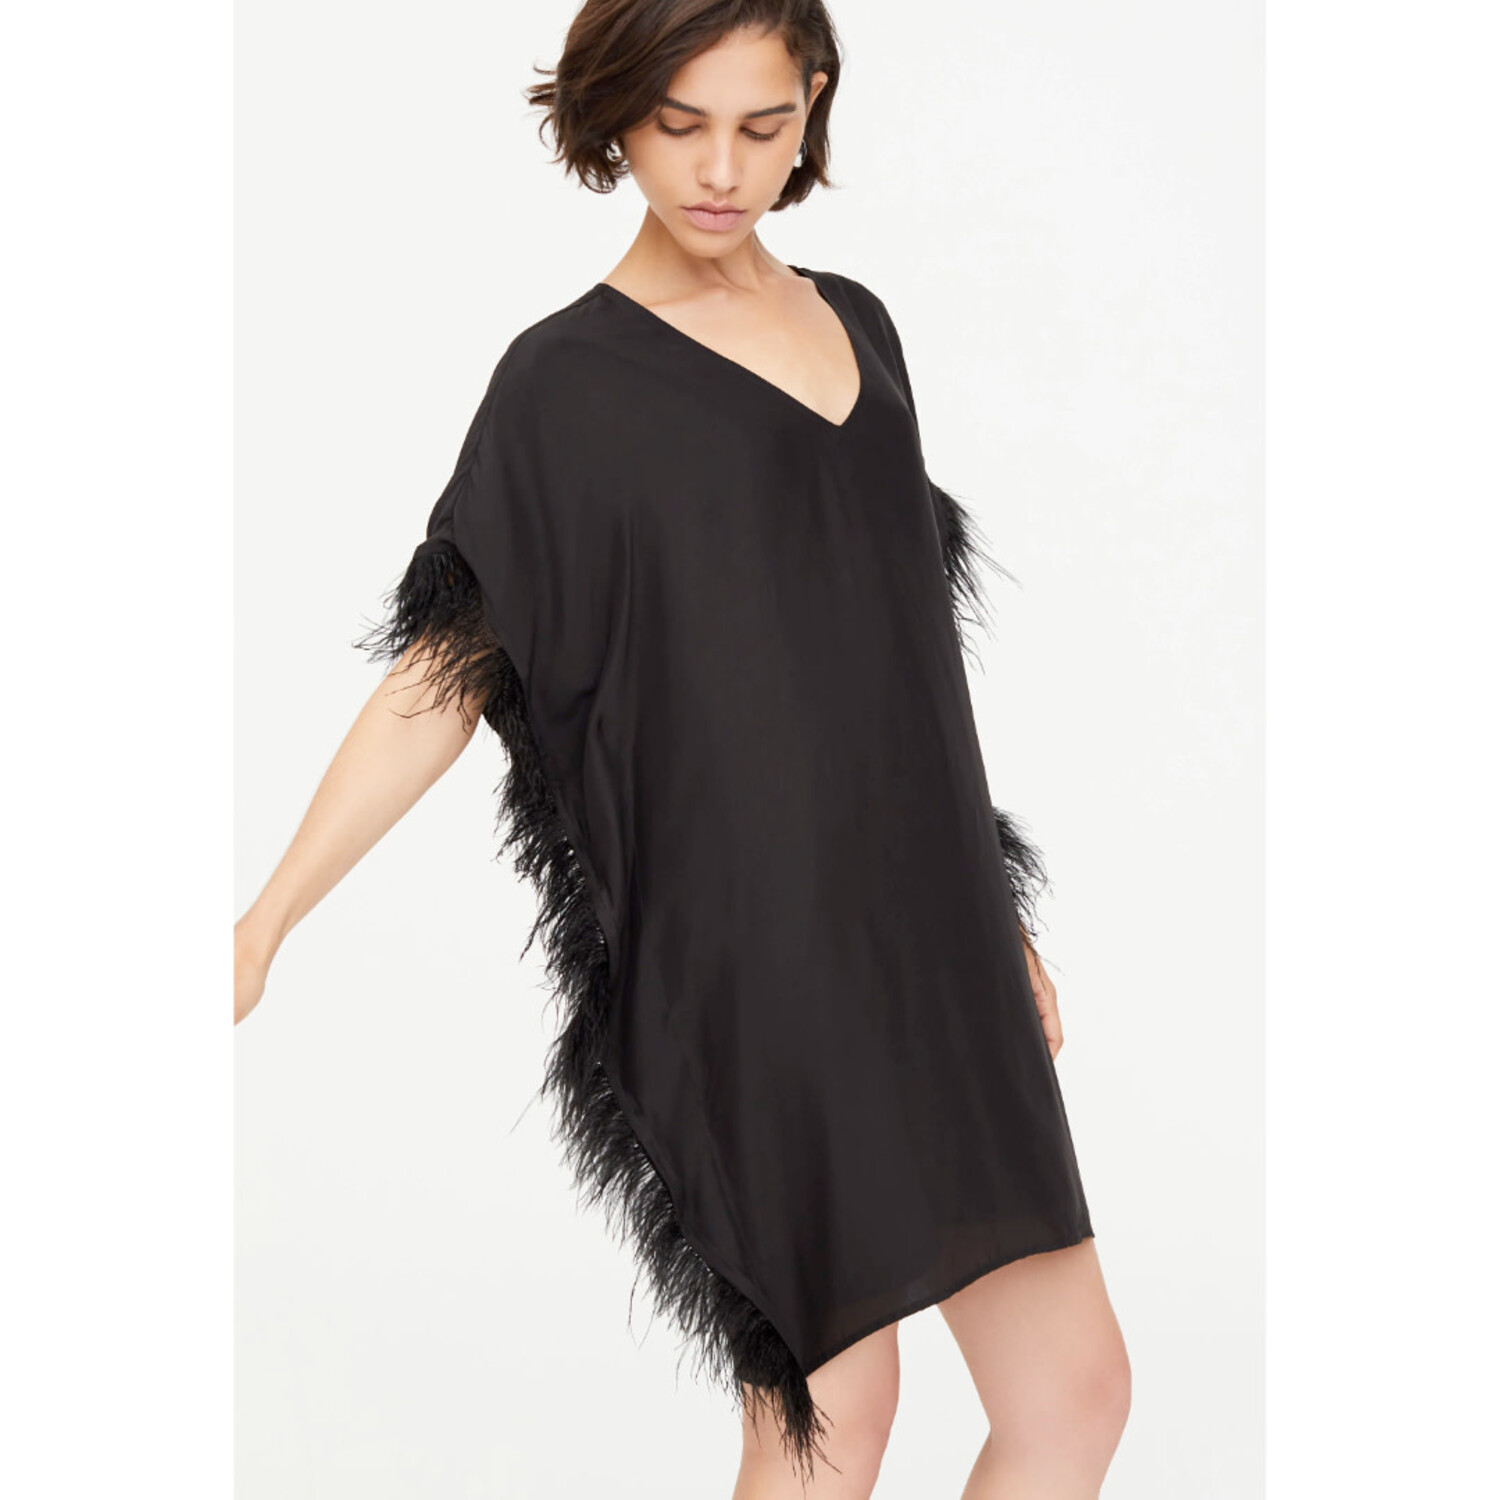 Marie Oliver Maura Feather Dress Black / L